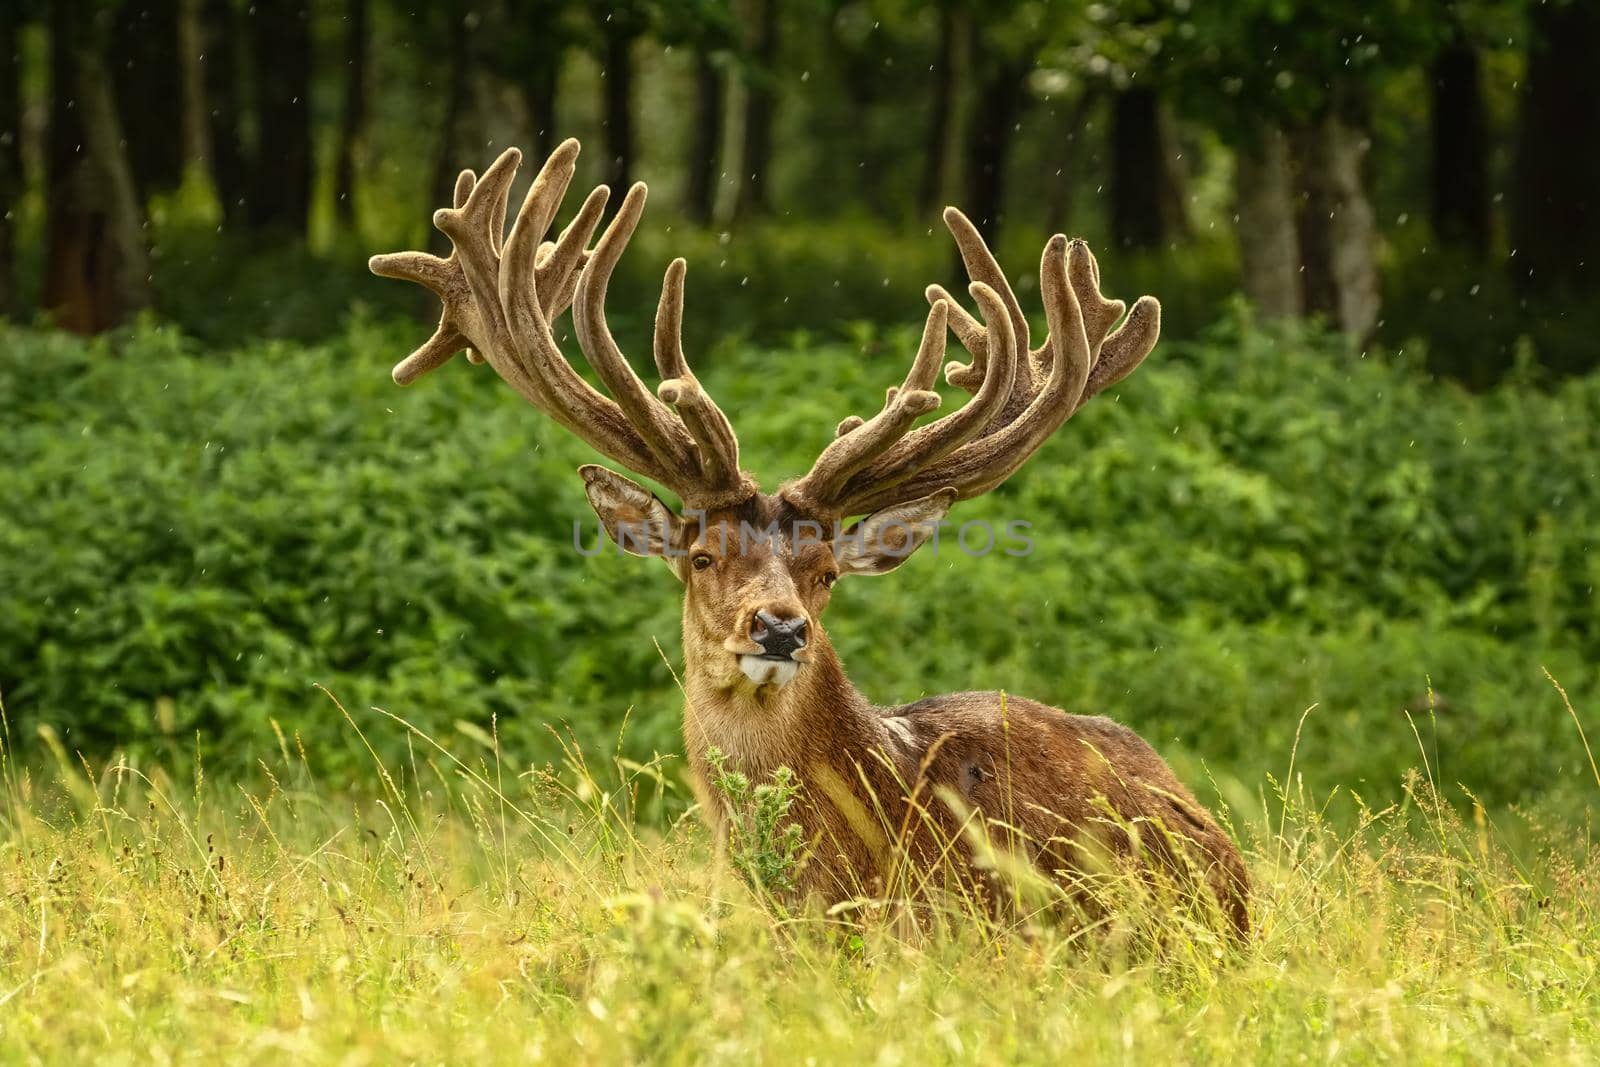 Portrait of a deer with big horns near the forest